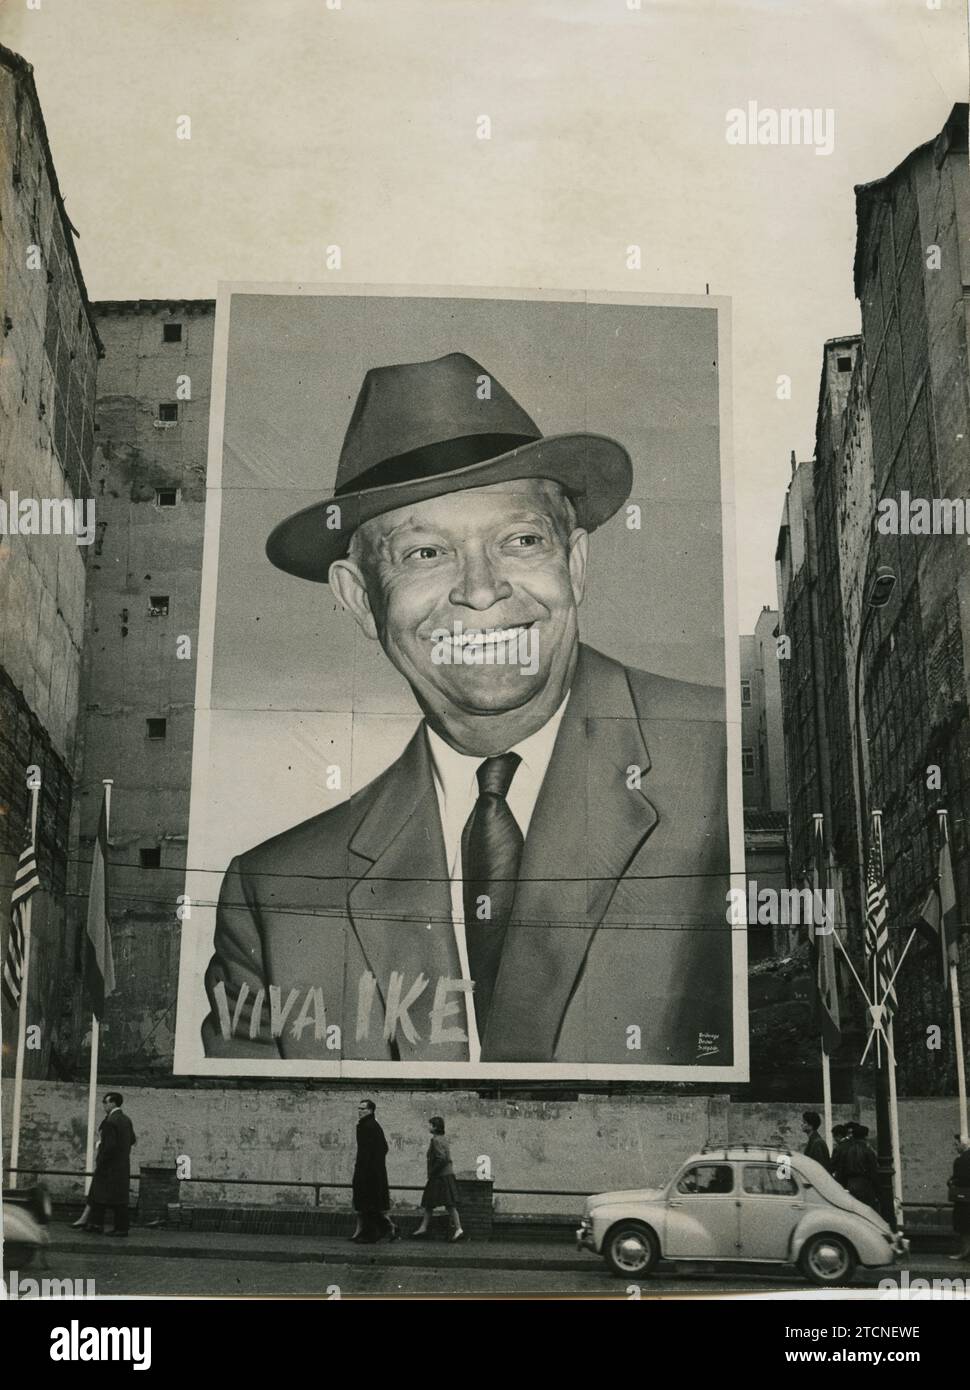 Madrid, 12/20/1959. Preparations for the visit of North American President Dwight D. Eisenhower to Spain, the first by a president of the United States. In the image, one of the enormous posters with portraits of the North American president that were placed along the route that both leaders took in the streets of Madrid. Credit: Album / Archivo ABC / Teodoro Naranjo Domínguez Stock Photo